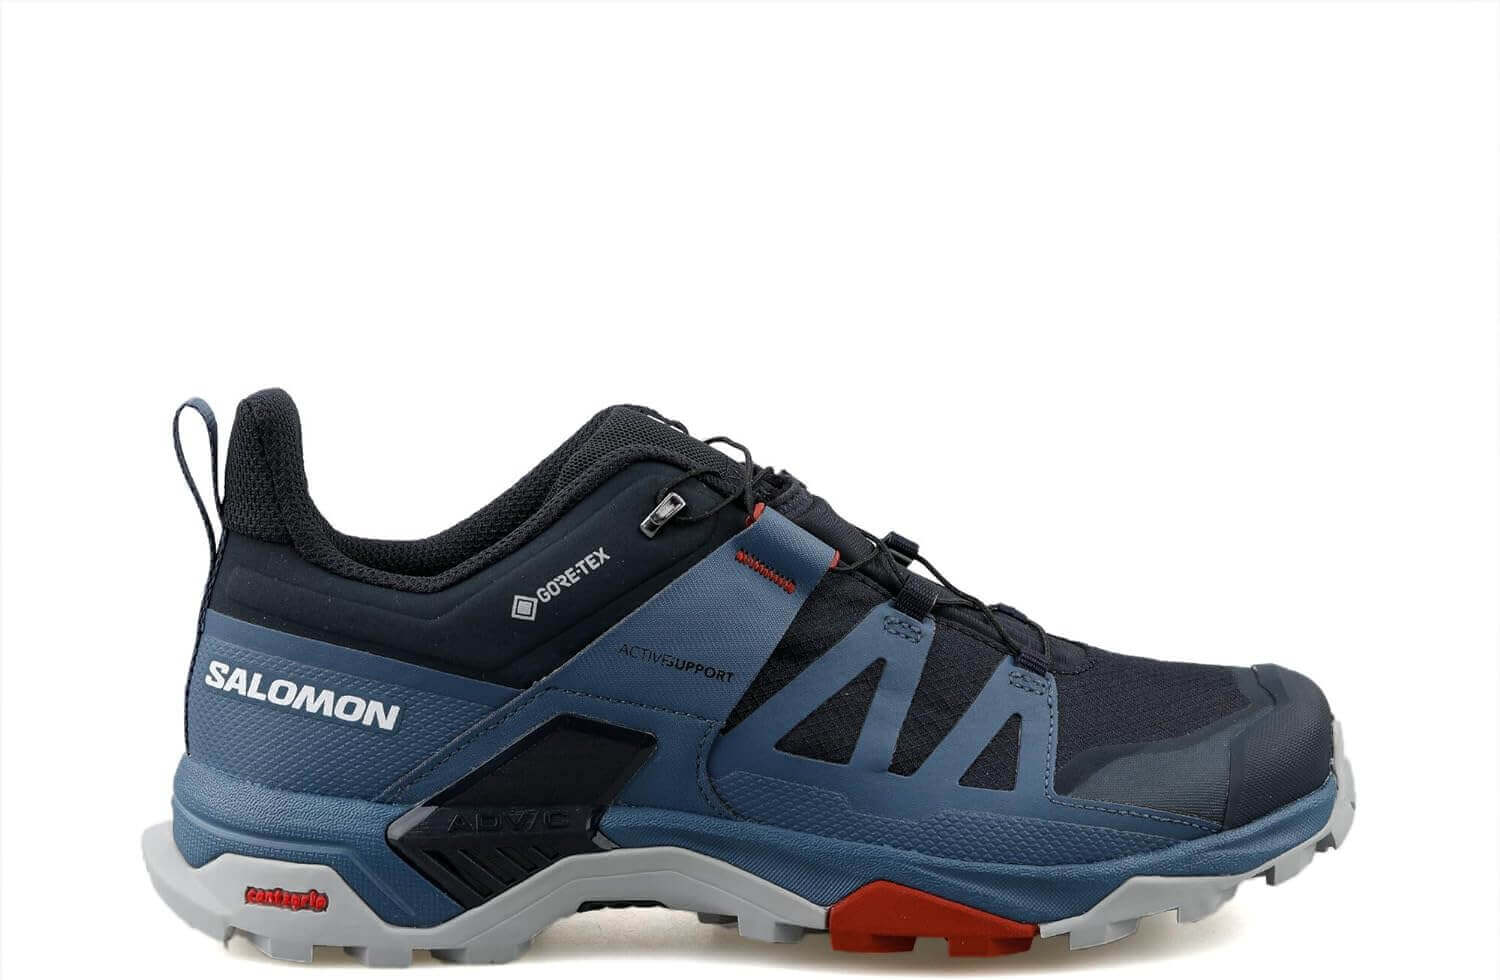 Shop The Latest >Salomon Men's X Ultra 4 GTX Hiking Shoes > *Only $251.93*> From The Top Brand > *Salomonl* > Shop Now and Get Free Shipping On Orders Over $45.00 >*Shop Earth Foot*